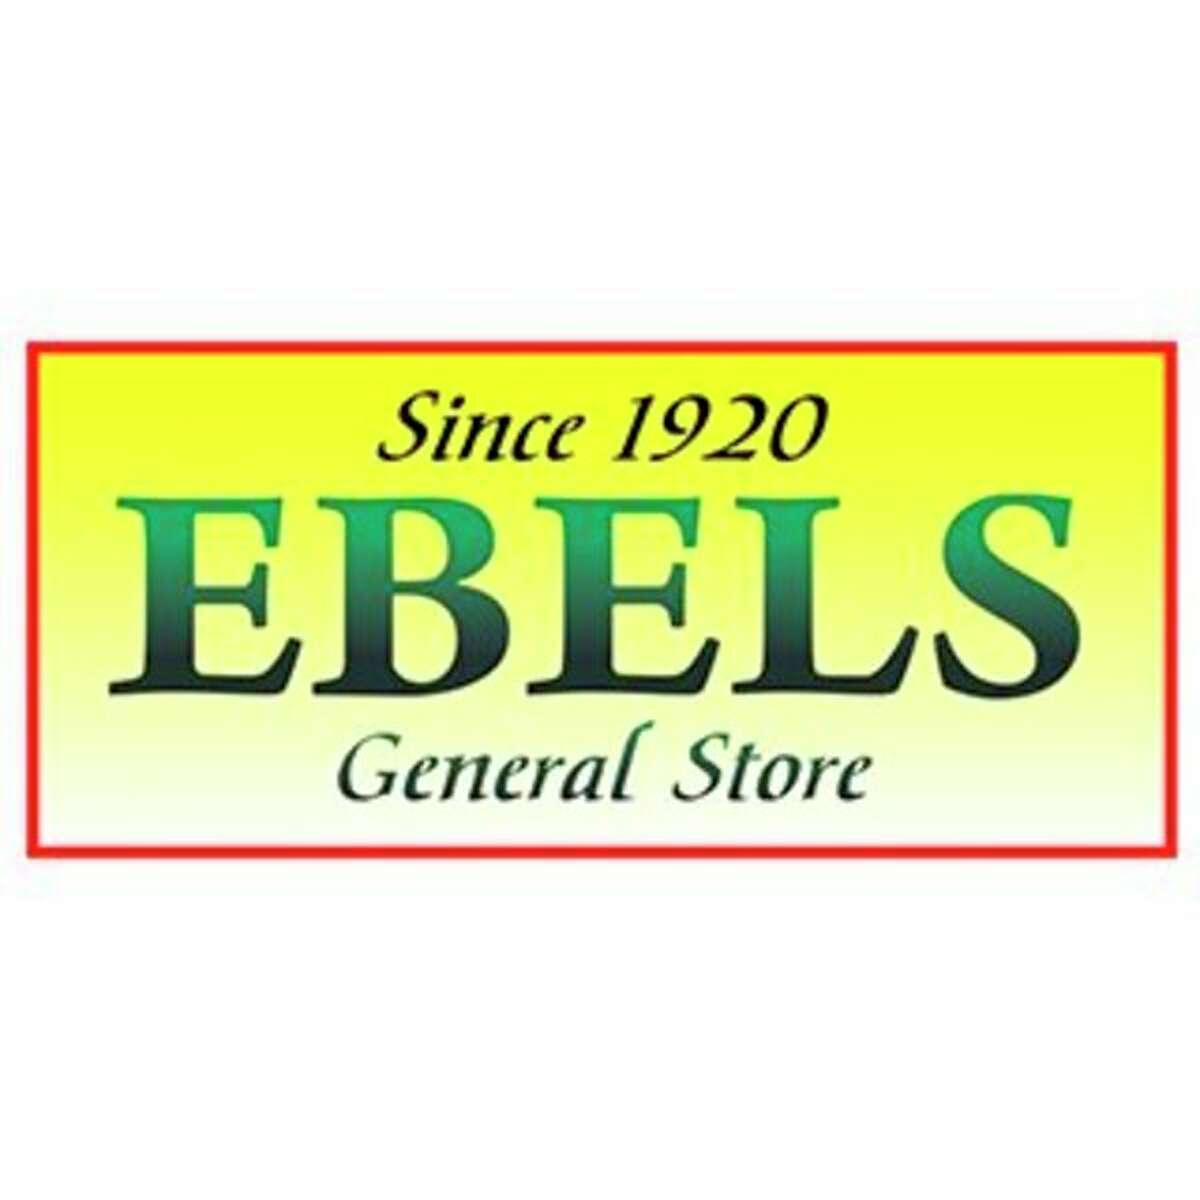 First opening its doors in 1920, Ebels General Store will be celebrate their 100th year in the new year. (Courtesy photo)